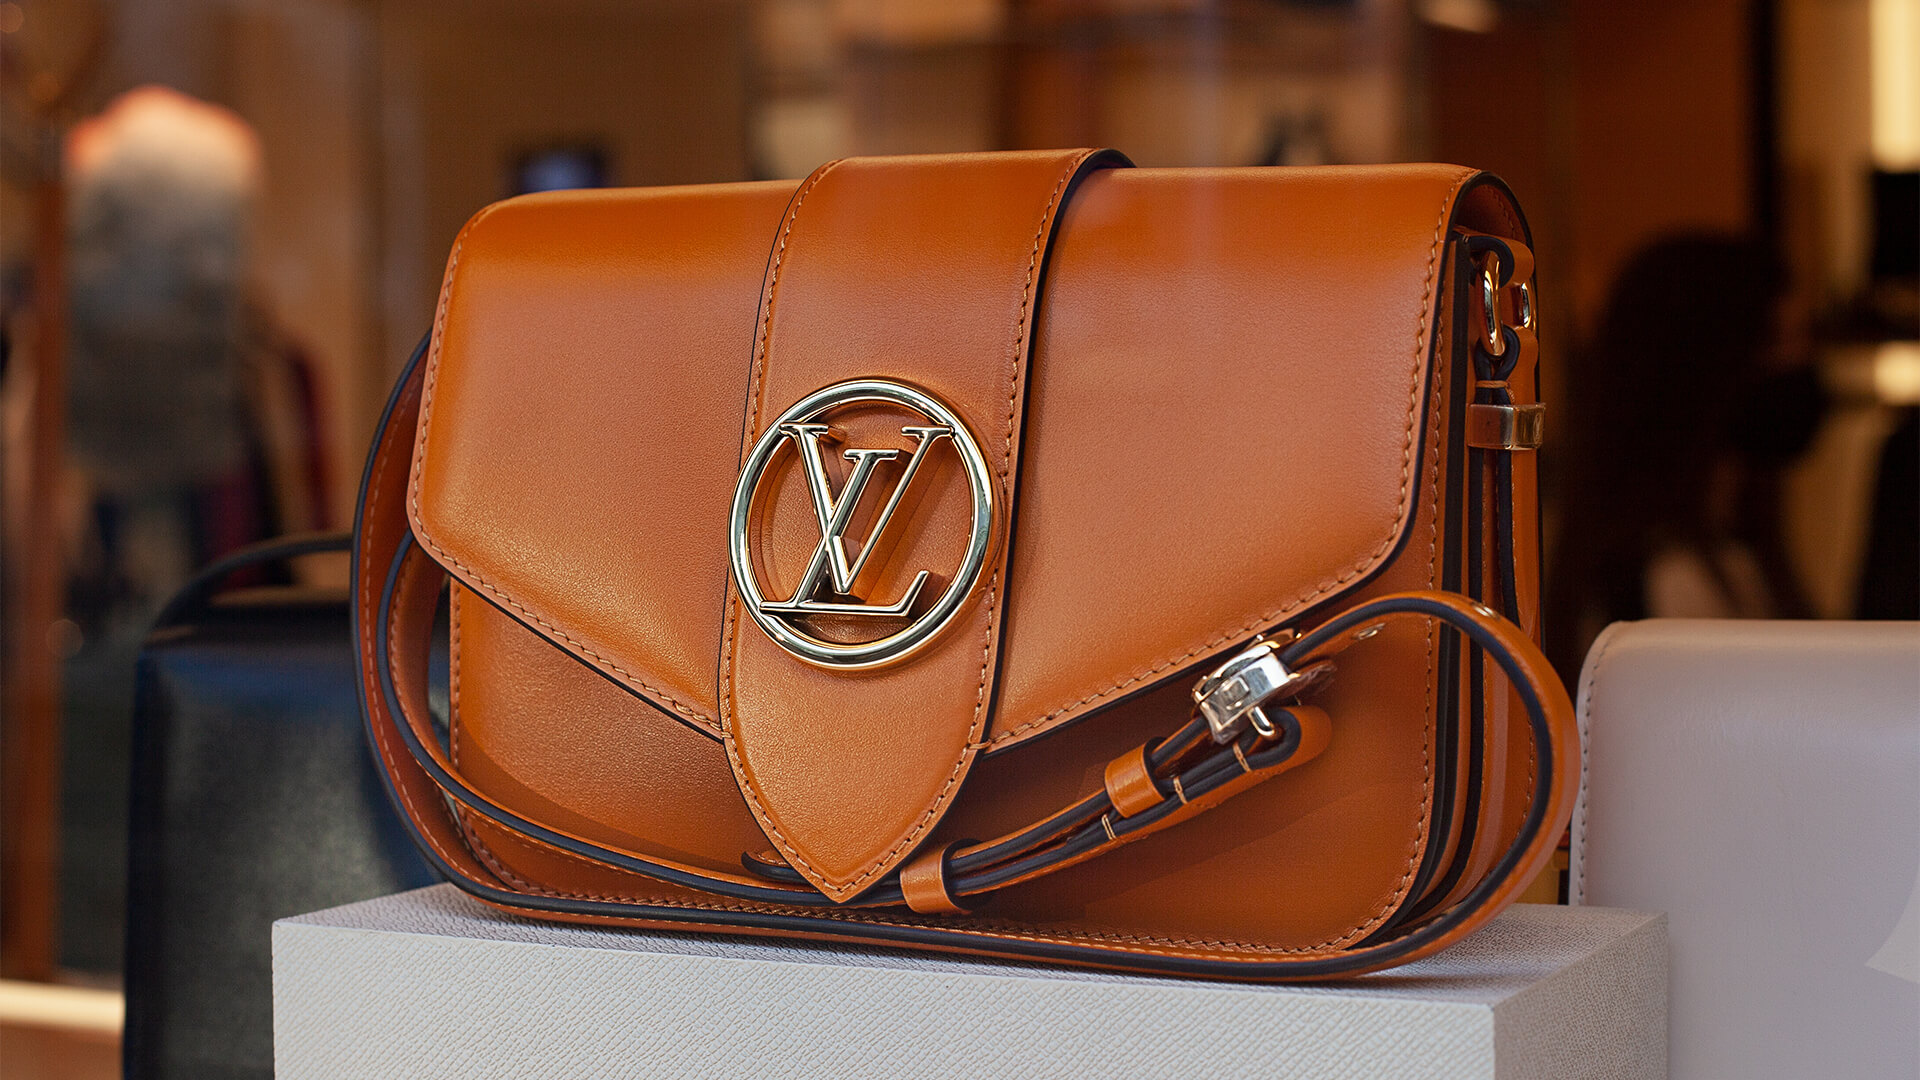 The World's Best-Loved Fashion Brands revealed: Louis Vuitton